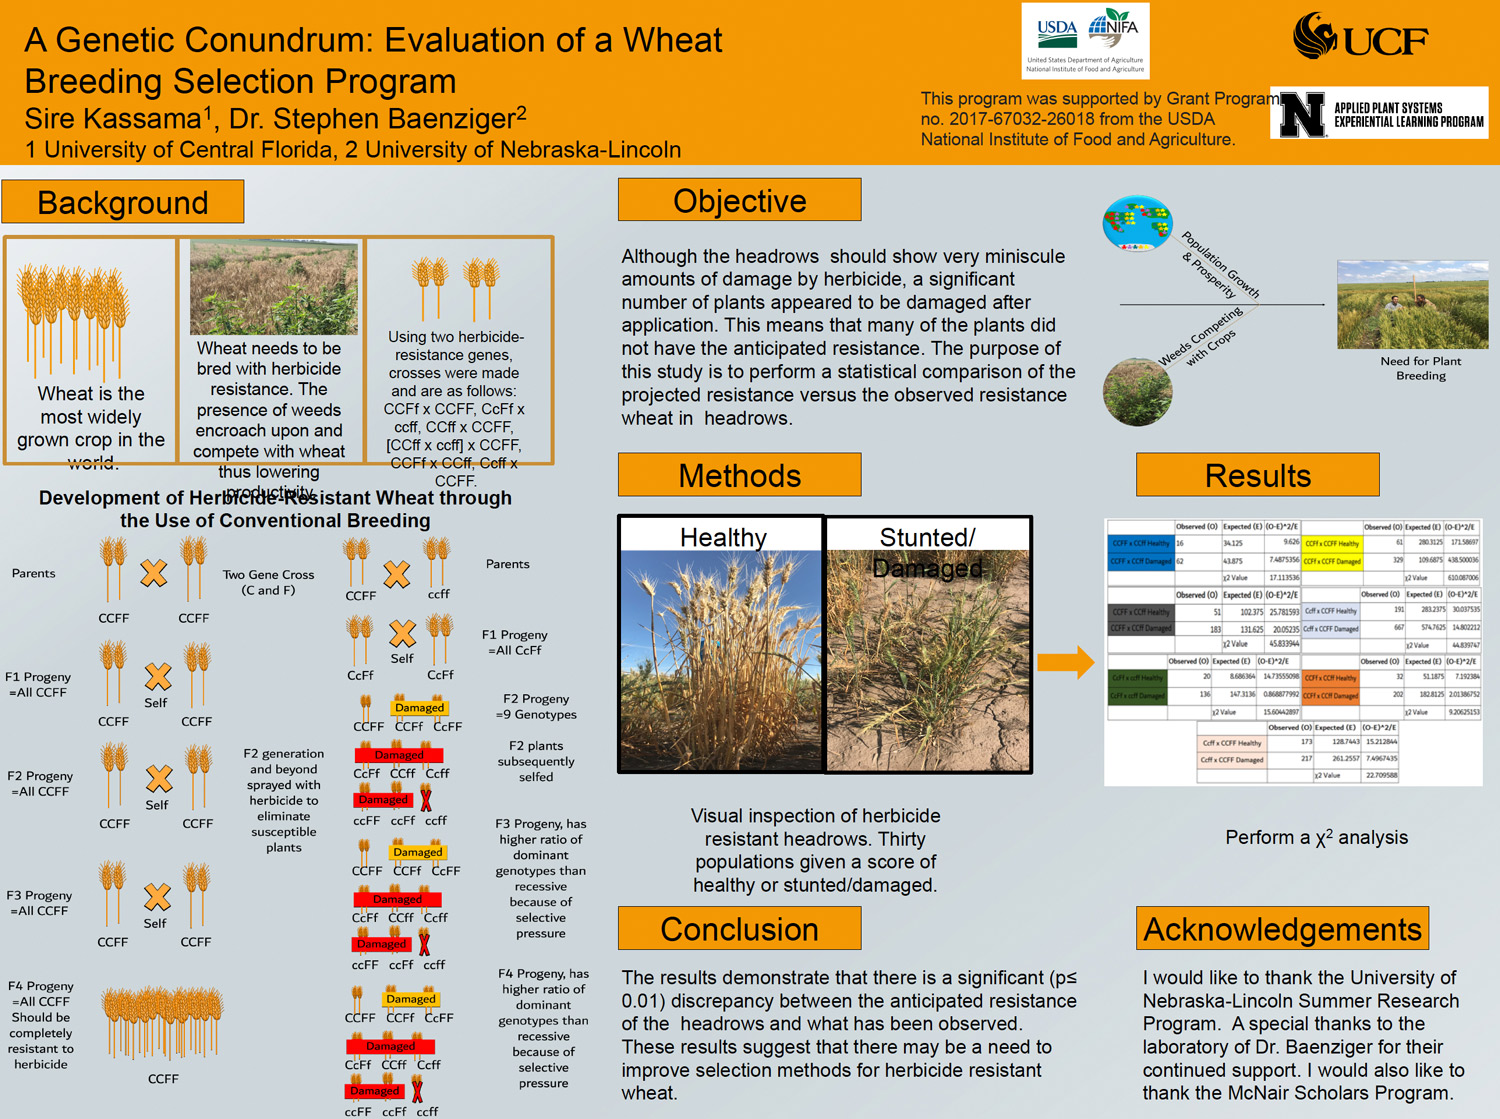 A Genetic Conundrum: Evaluation of a Wheat Breeding Selection Program poster